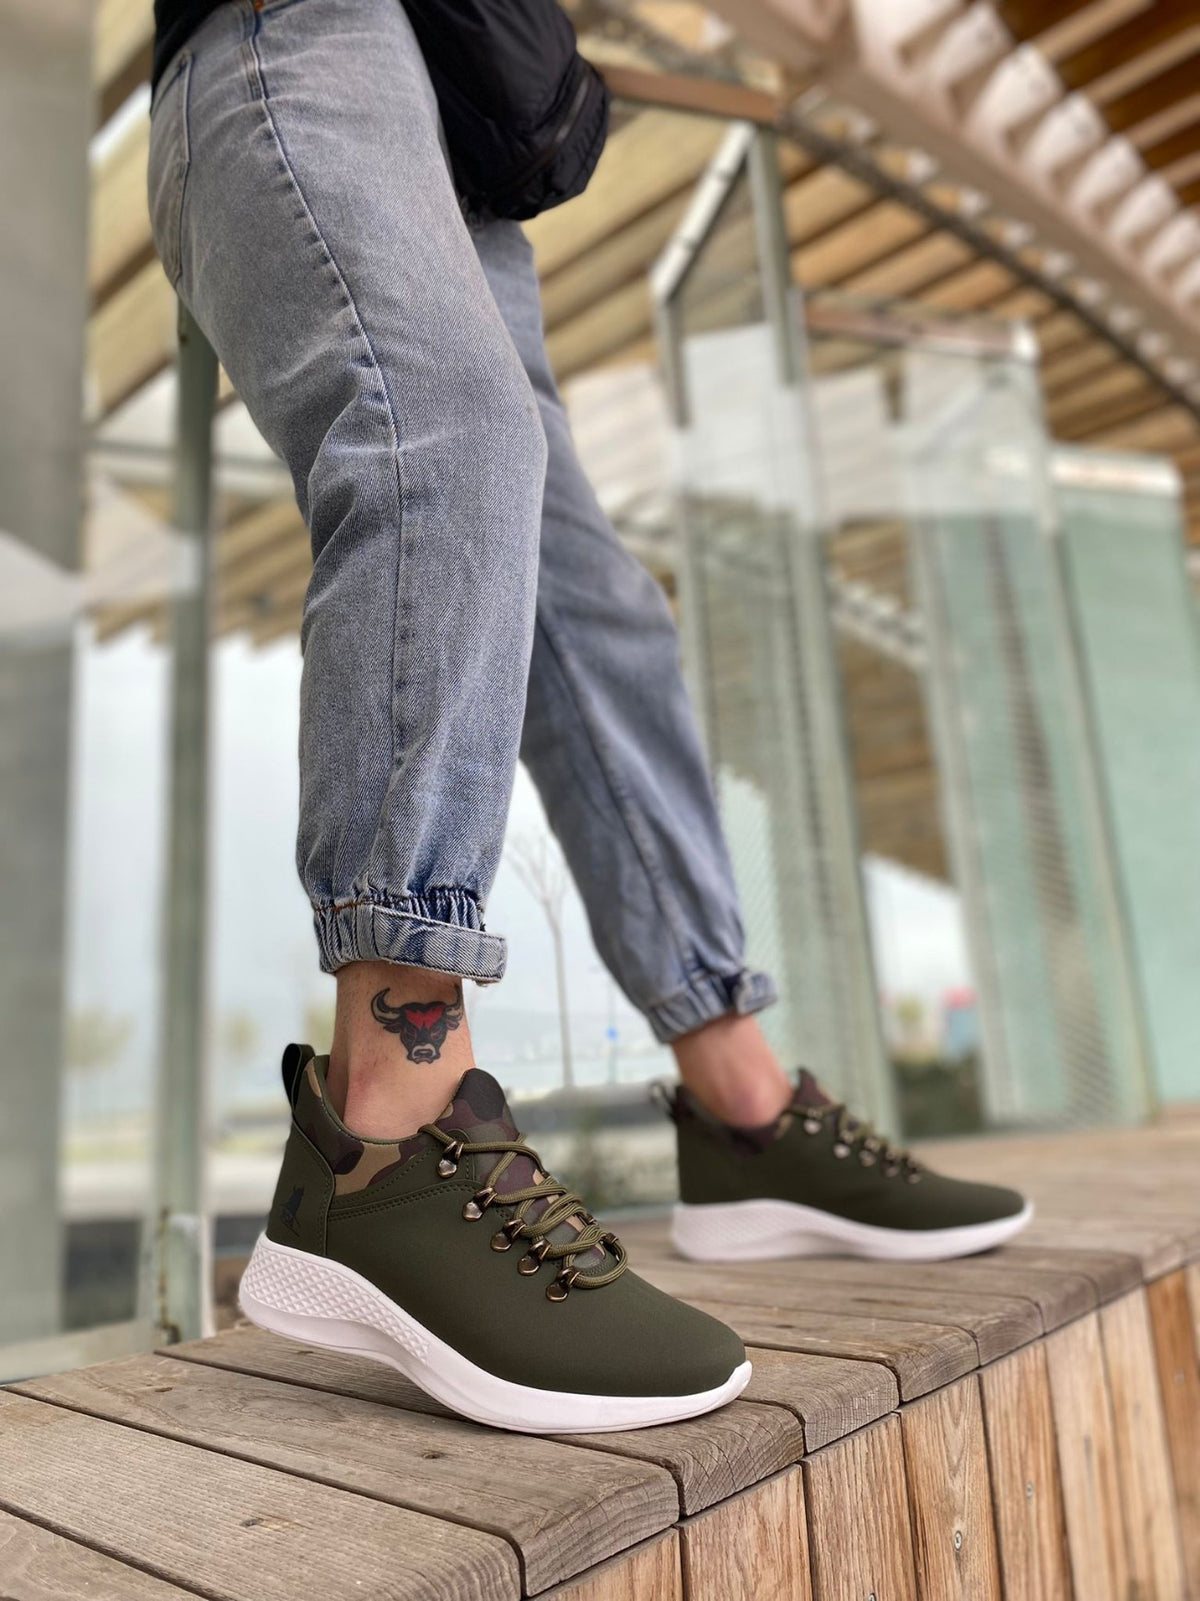 BA0601 Lace-up Comfortable High Sole Khaki camouflage Casual Men's Sneakers - STREETMODE ™